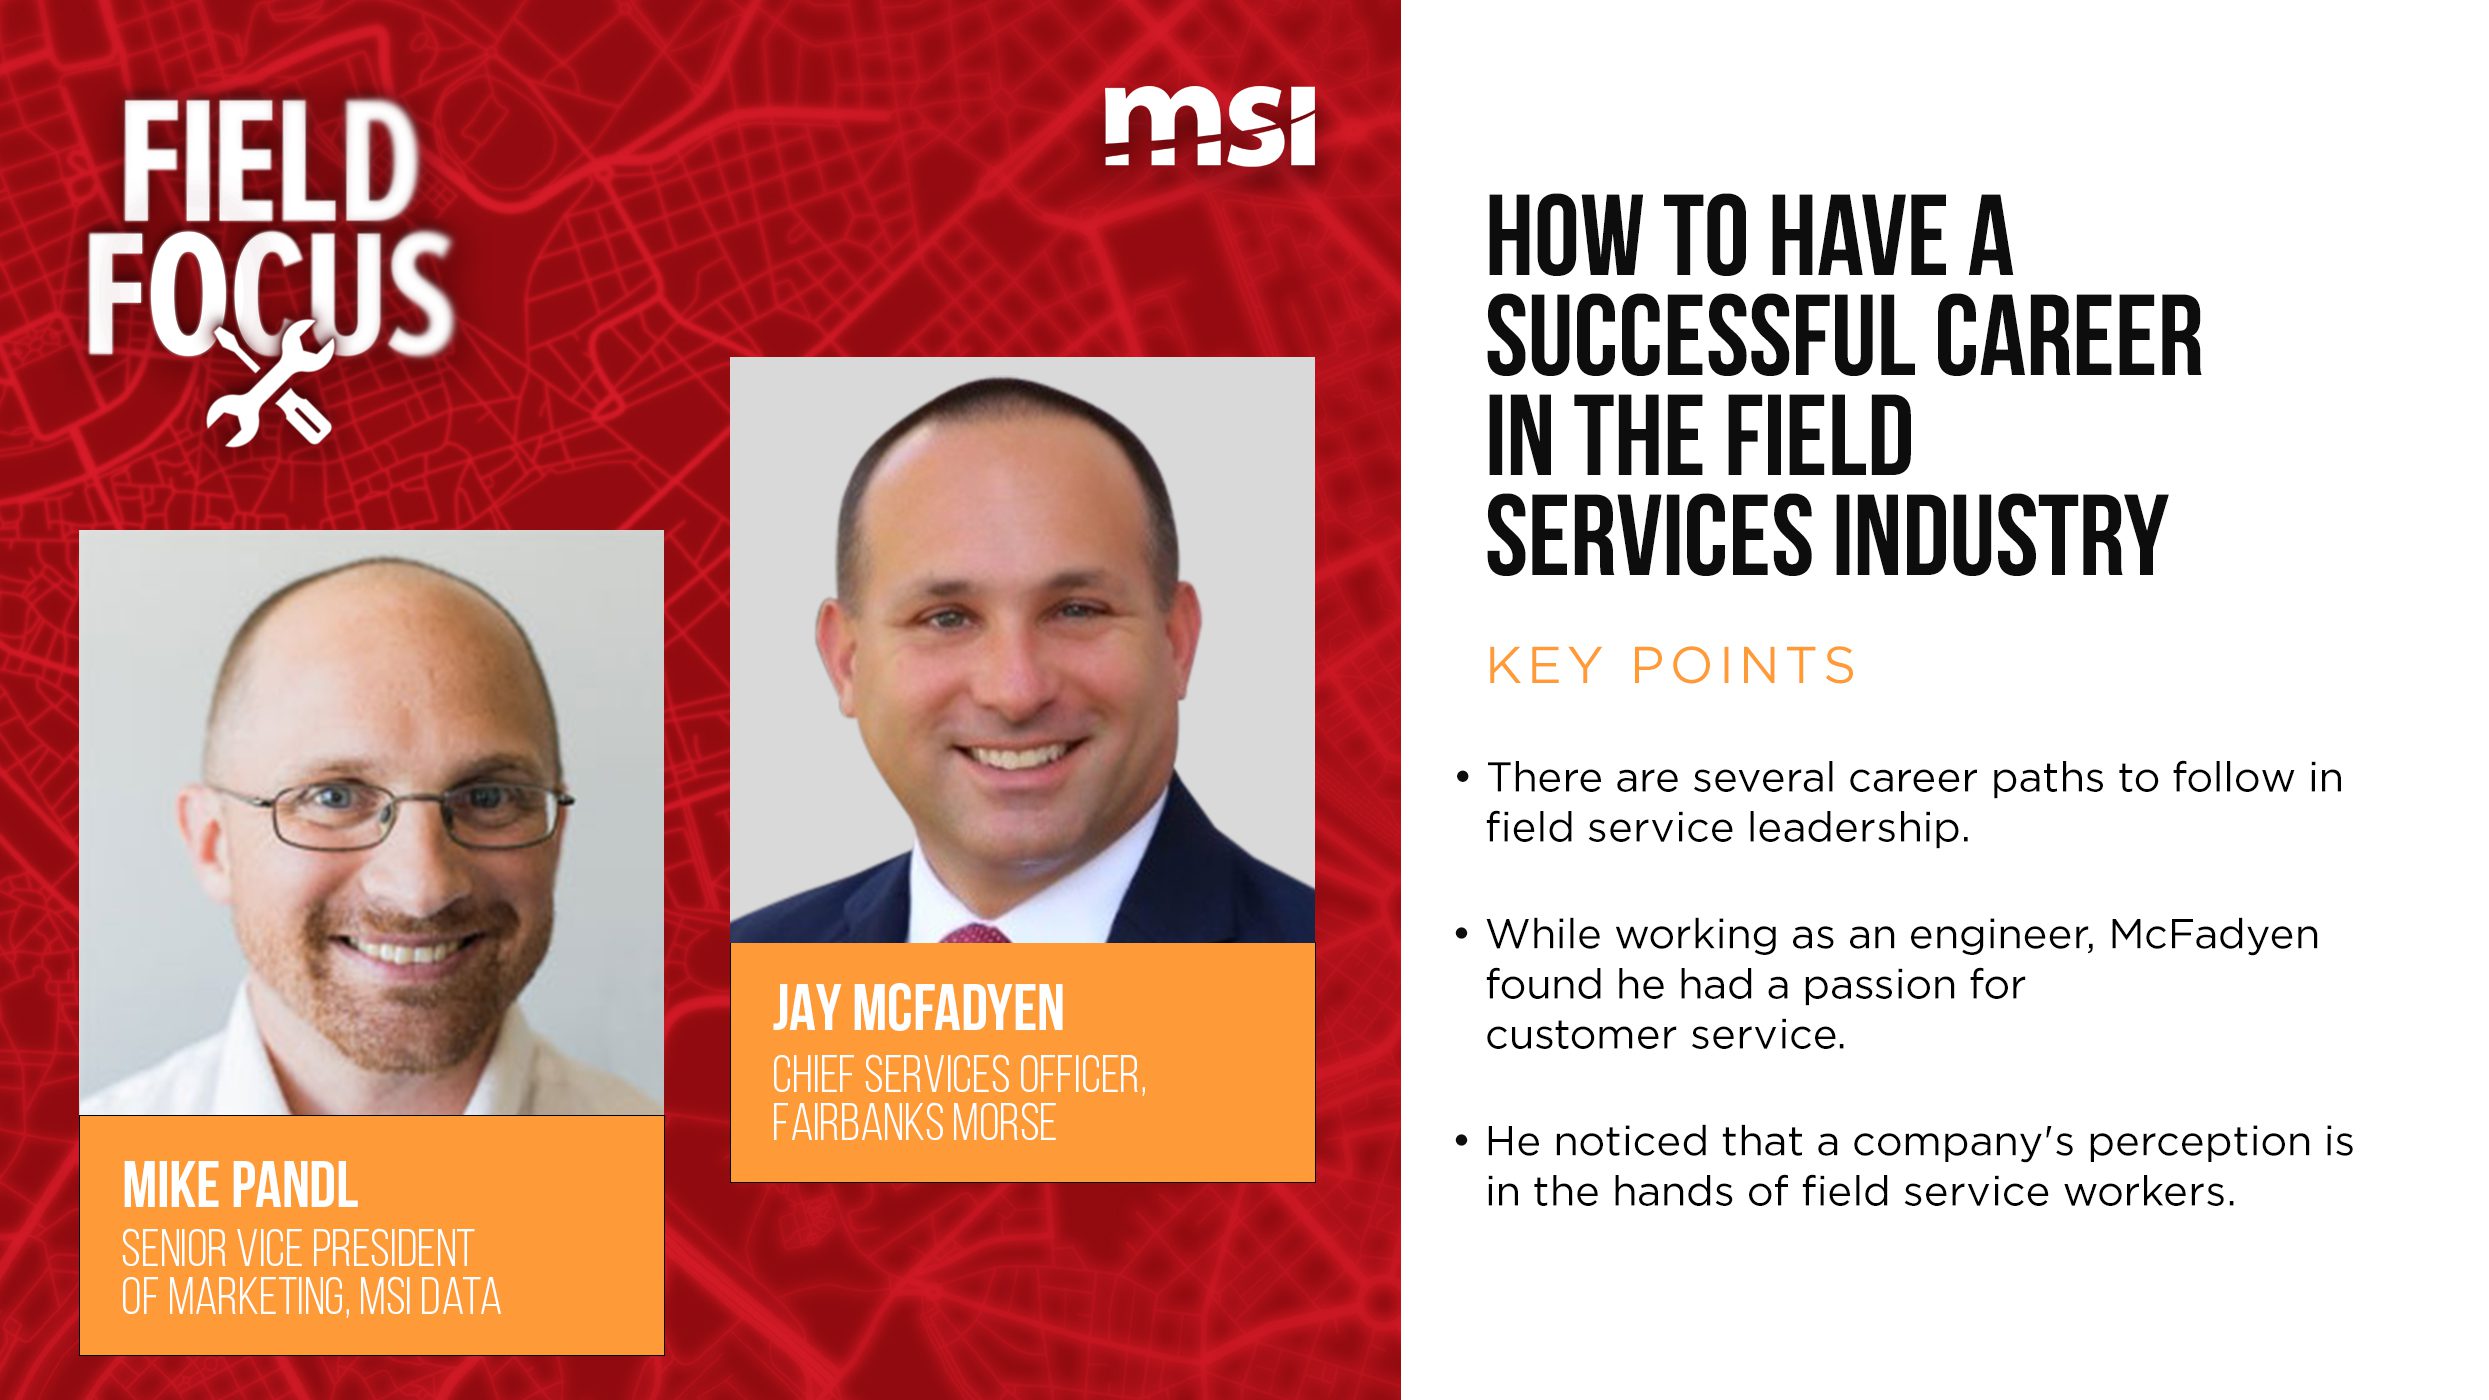 How to have a successful career in the field services industry with Chief Services Officer Jay McFadyen Fairbanks Morse